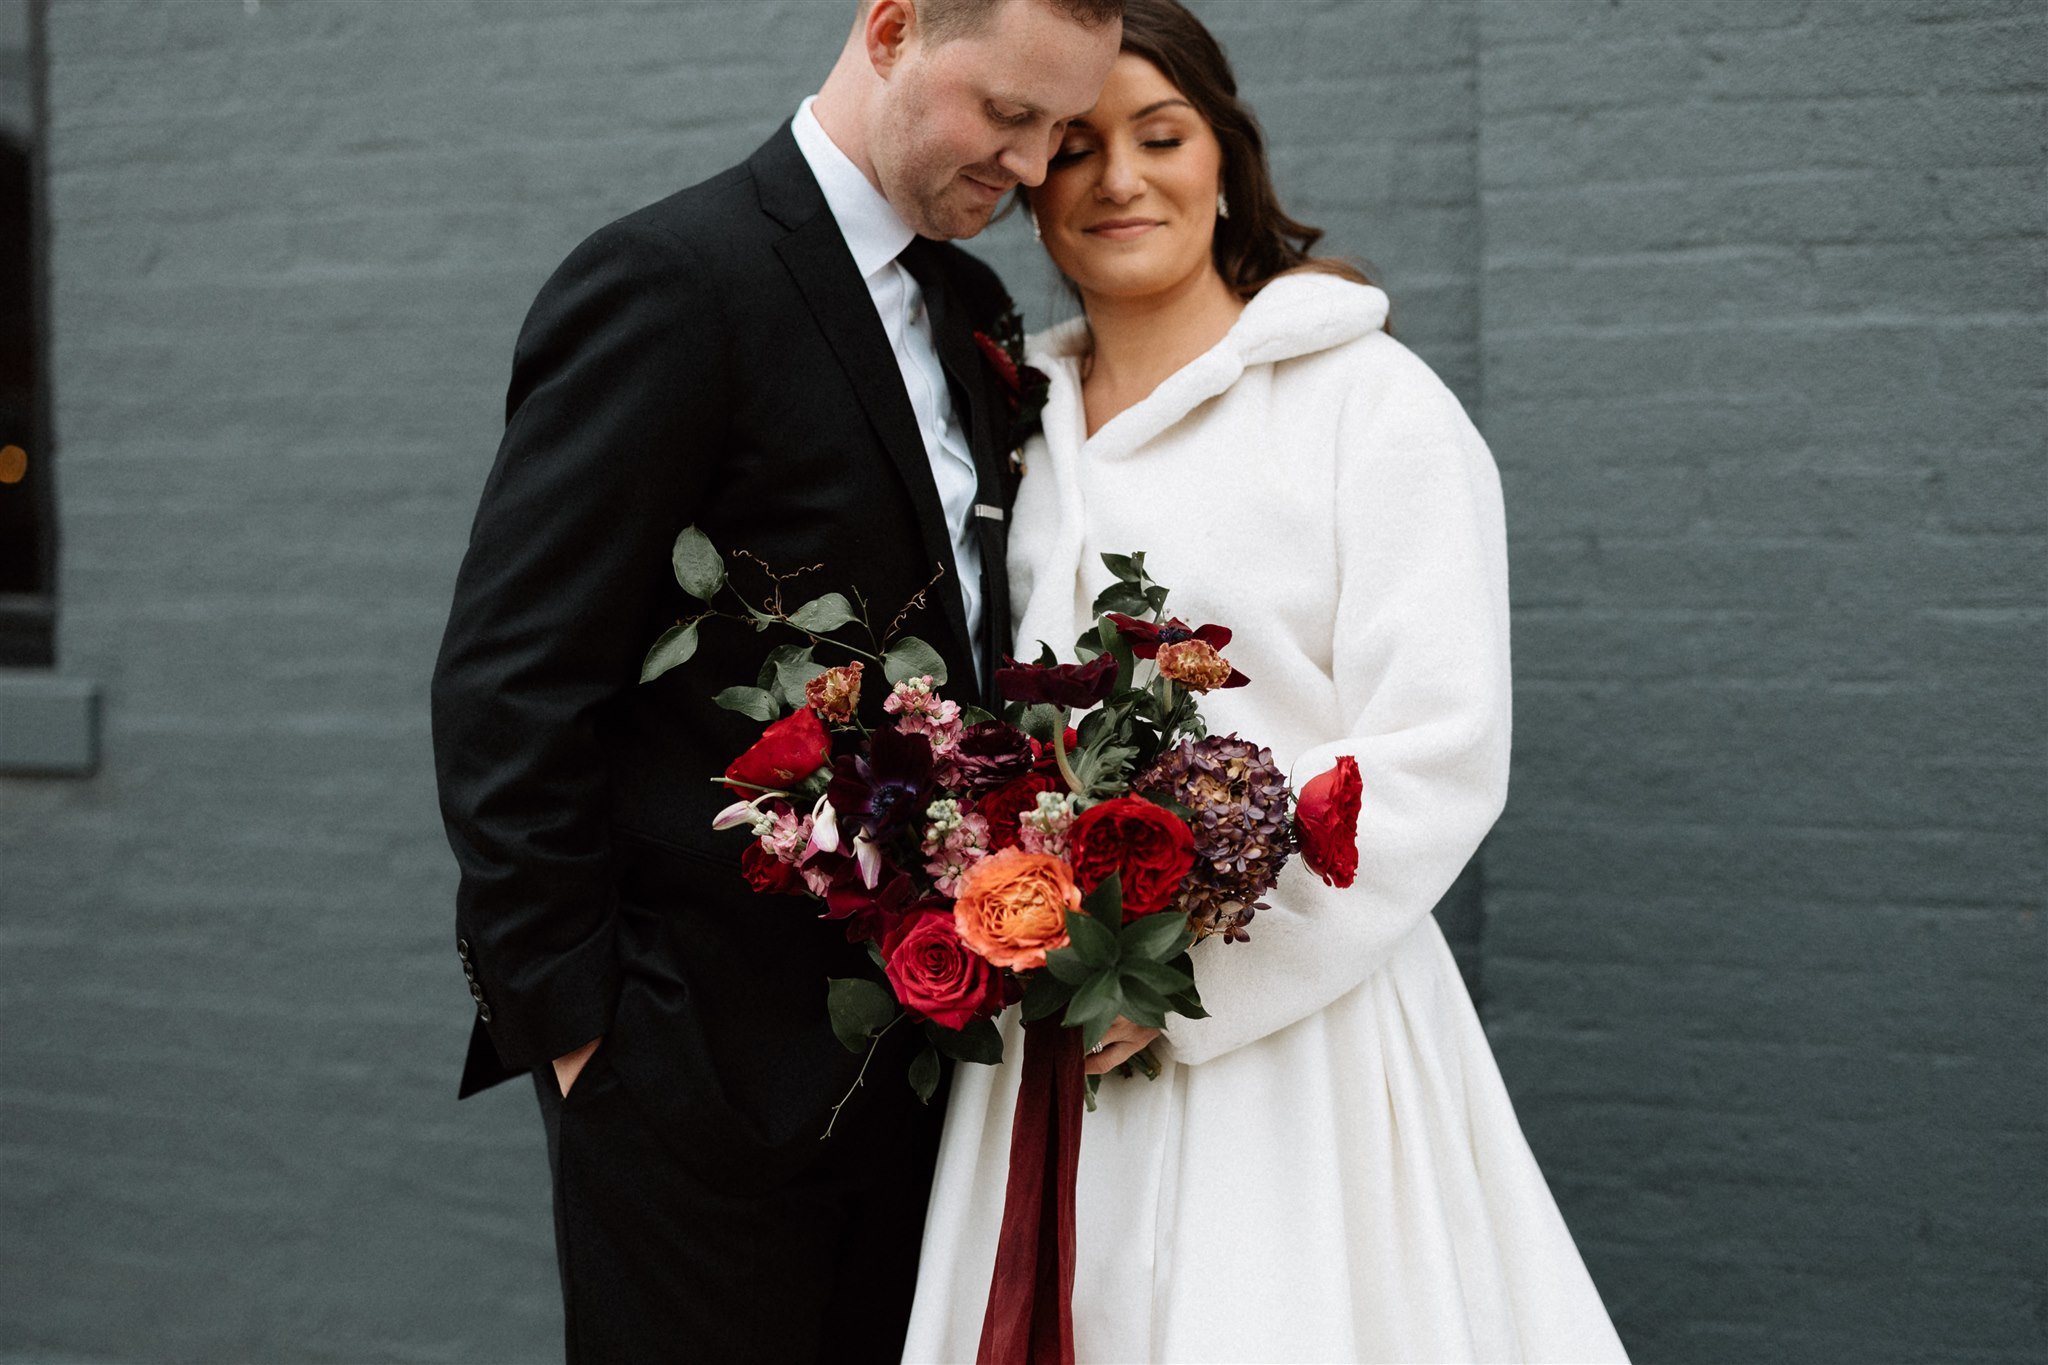  A couple lean in towards each other, smiling, outside a brick wedding venue. The bride is wearing a white furry coat and holding a large bouquet of dramatic red and orange flowers, accented by green leaves.  